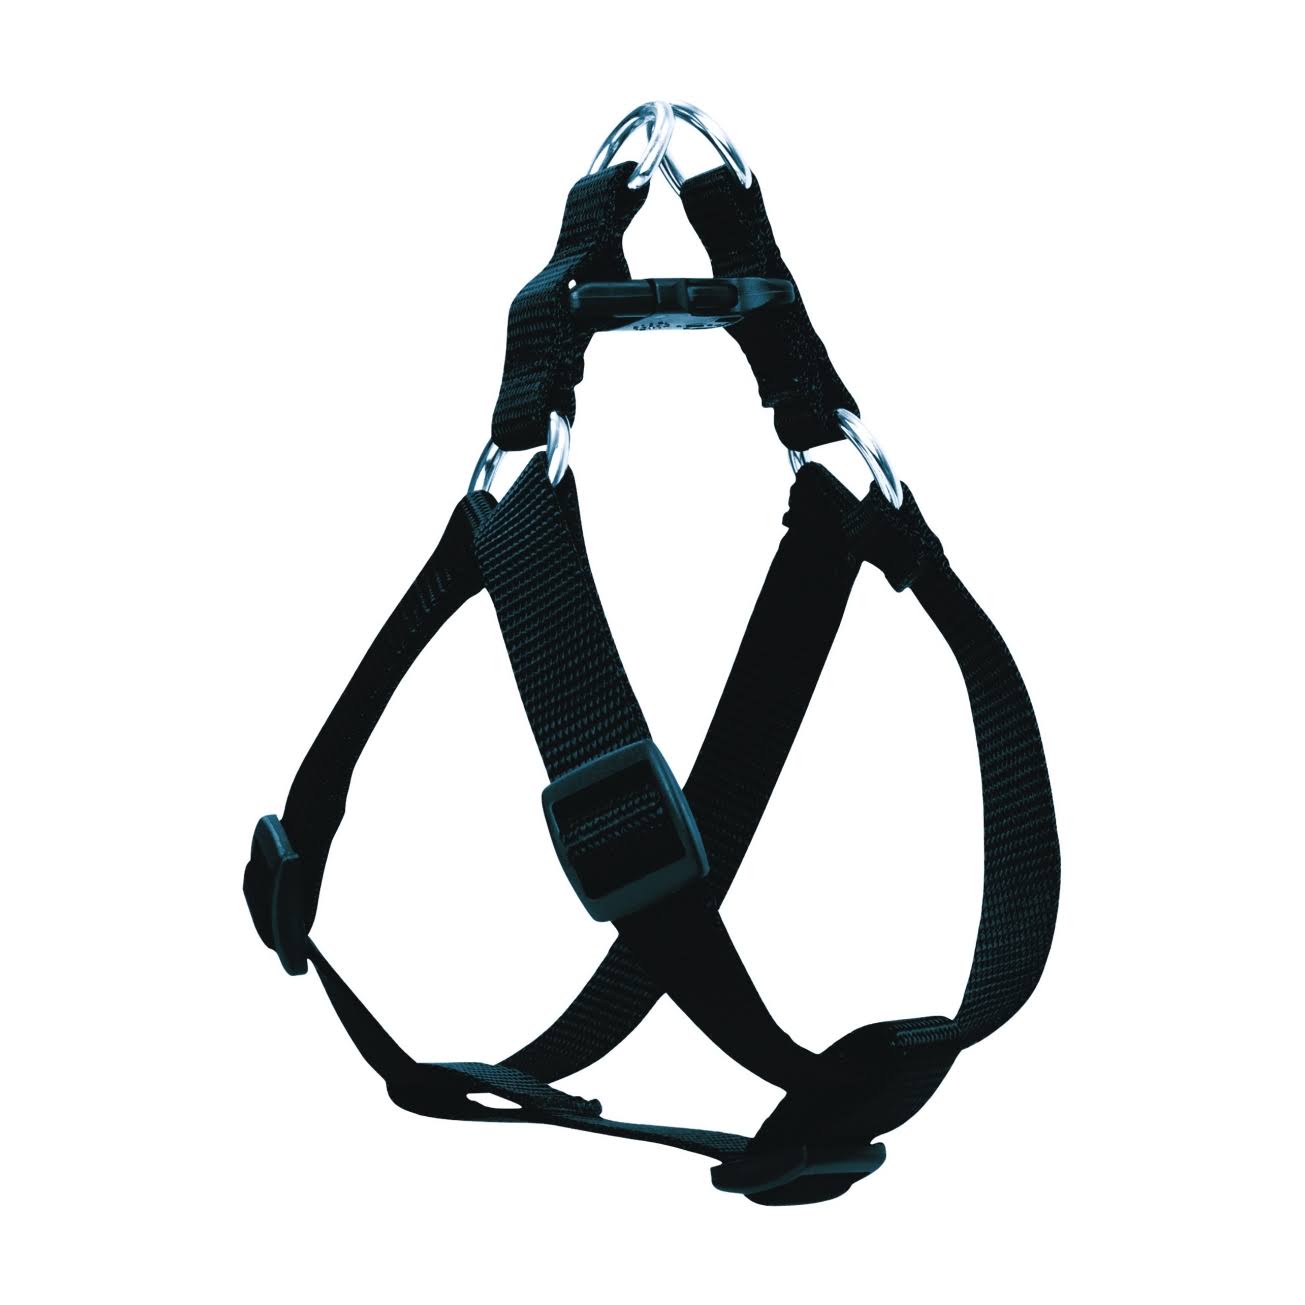 Lupinepet Dog Harness - 3/4", Black, for Medium Dogs